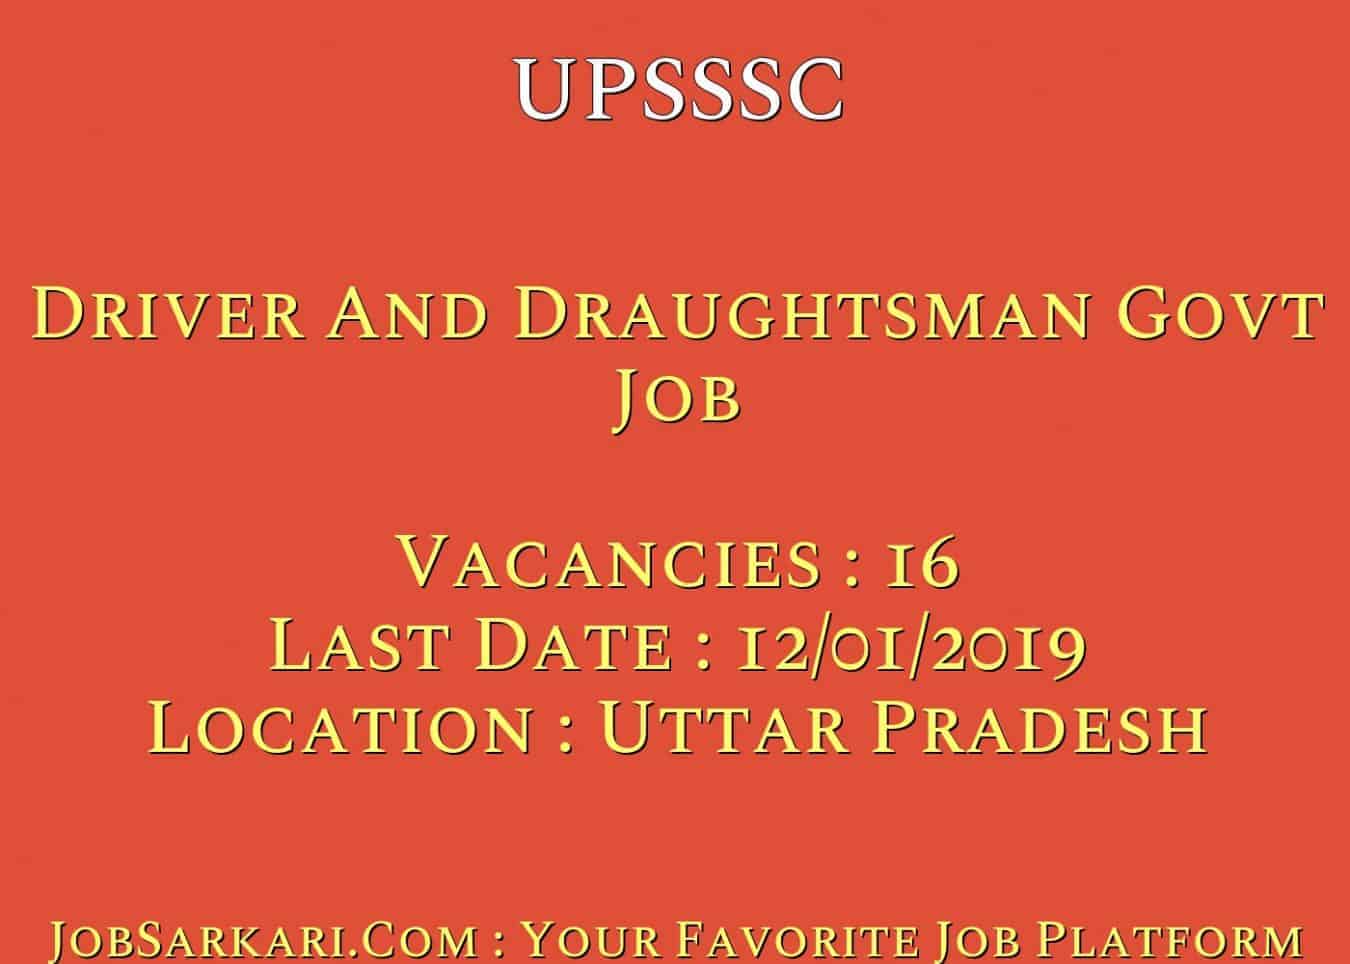 UPSSSC Recruitment 2018 For Driver And Draughtsman Govt Job